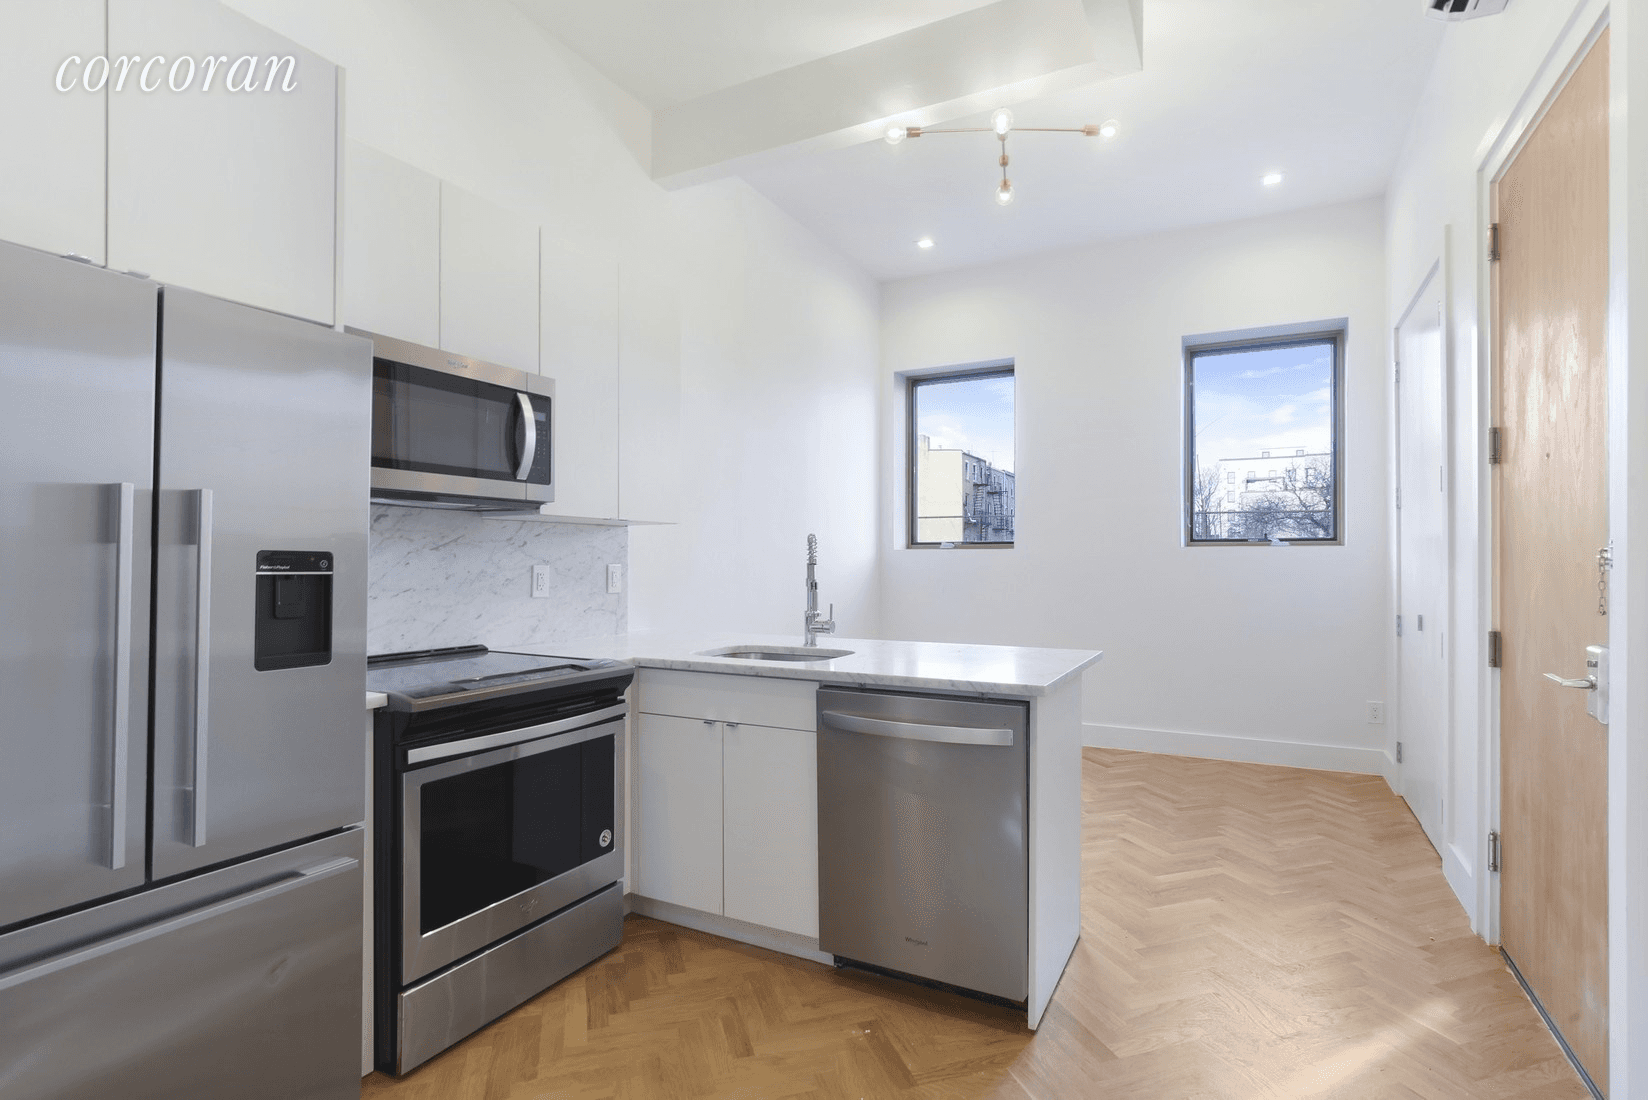 Finally an opportunity to own a piece of wonderful Carroll Gardens in a light filled and all new condo in a converted 4 unit historic townhouse for a great price ...